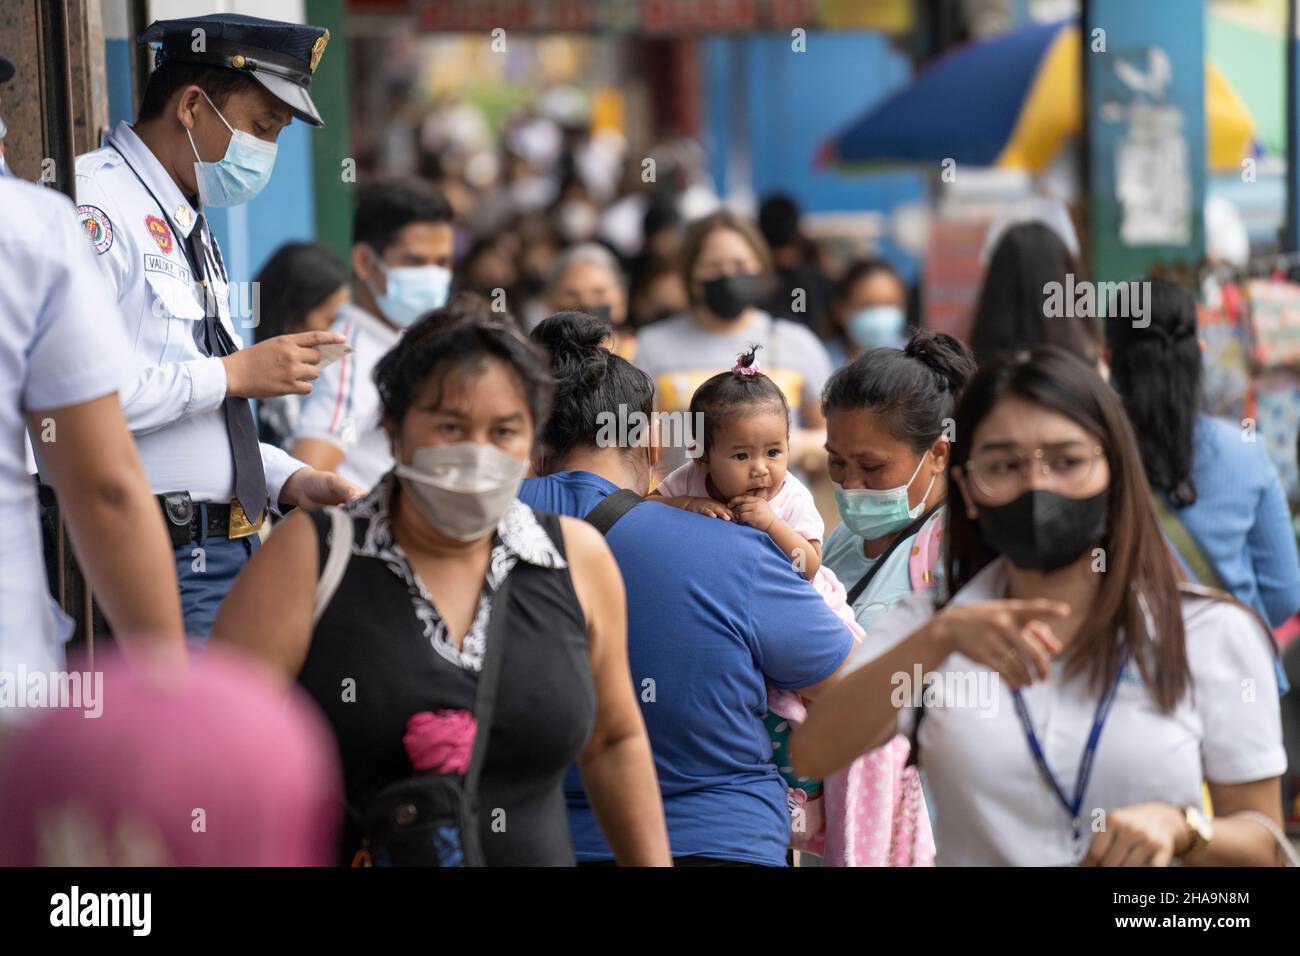 A security guard checking identity documents of an adult holding a child before being allowed to enter retail premises, Cebu City, Philippines Stock Photo